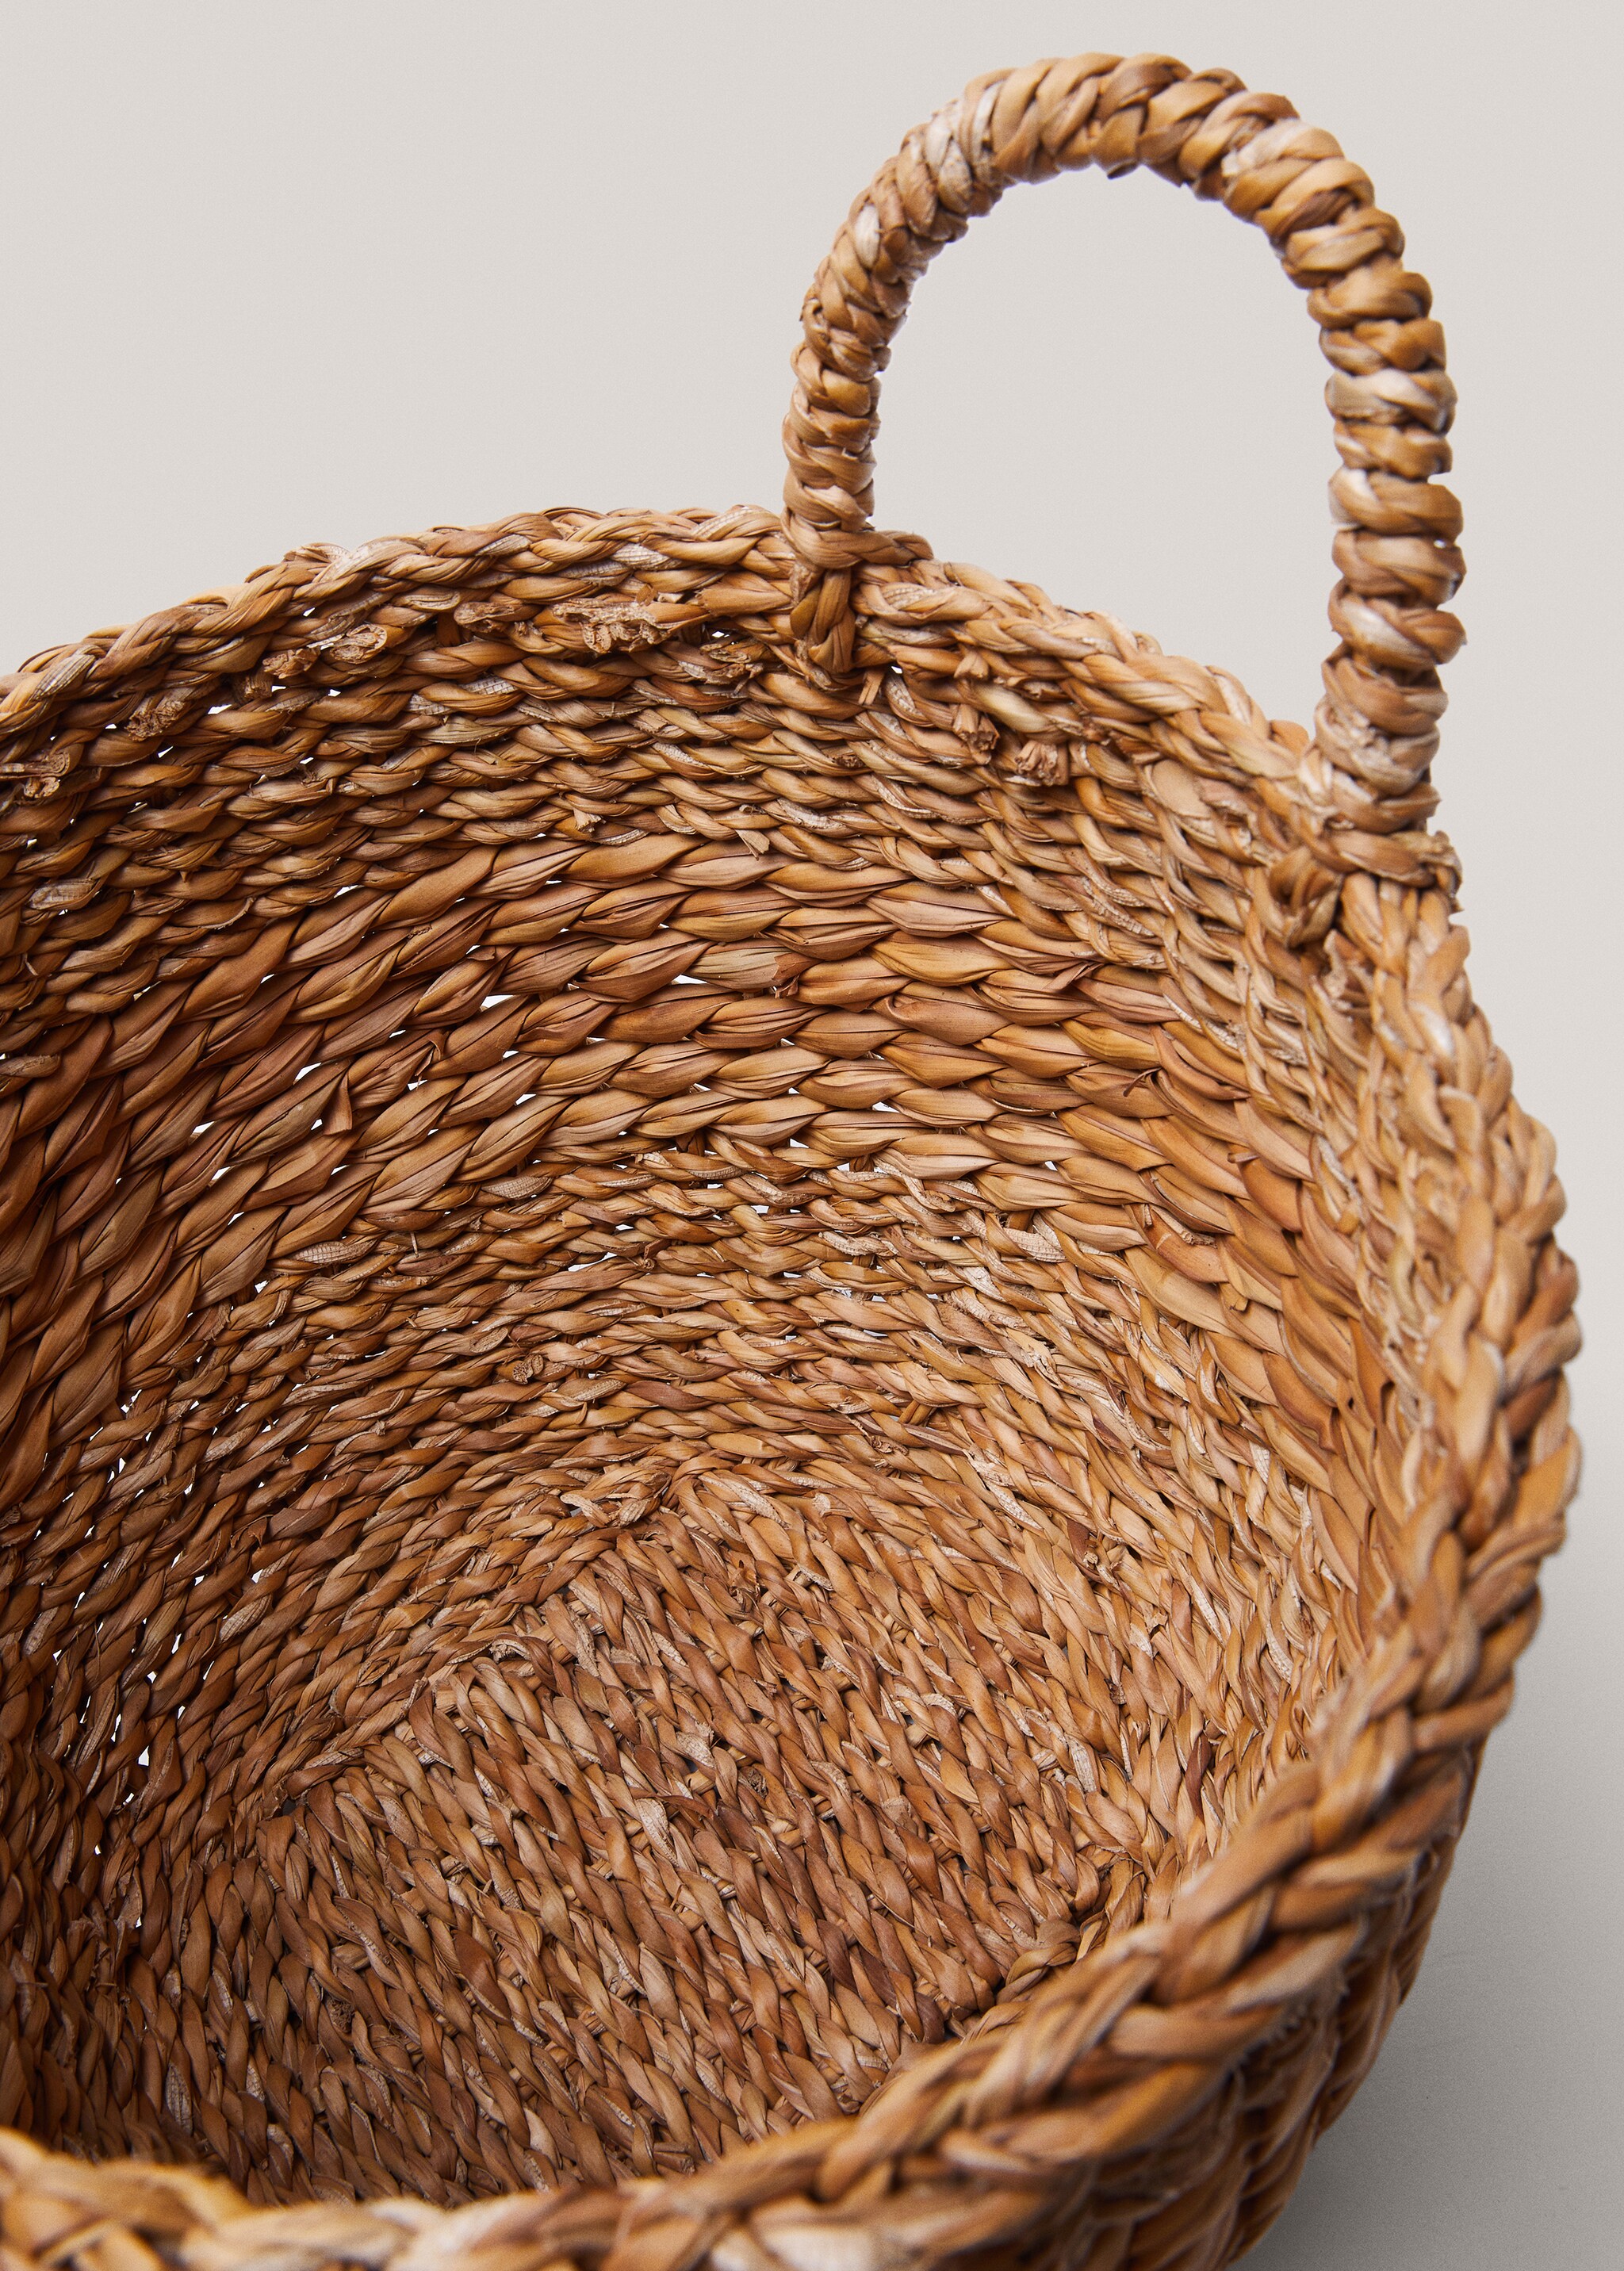 Round basket 11.02x7.87x8.66 in - Details of the article 3